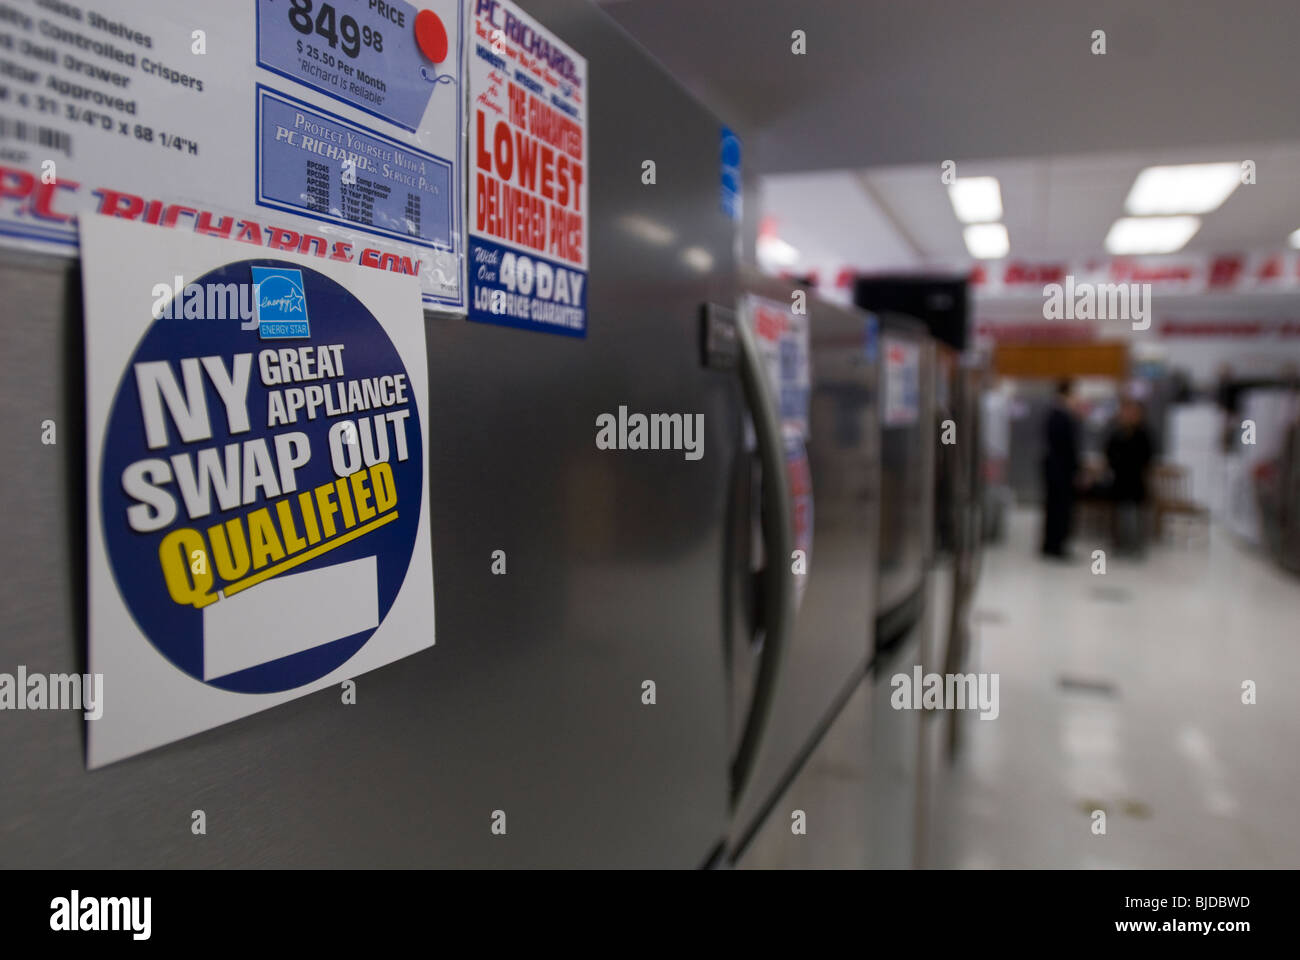 Energy Star rated refrigerators on sale Stock Photo - Alamy